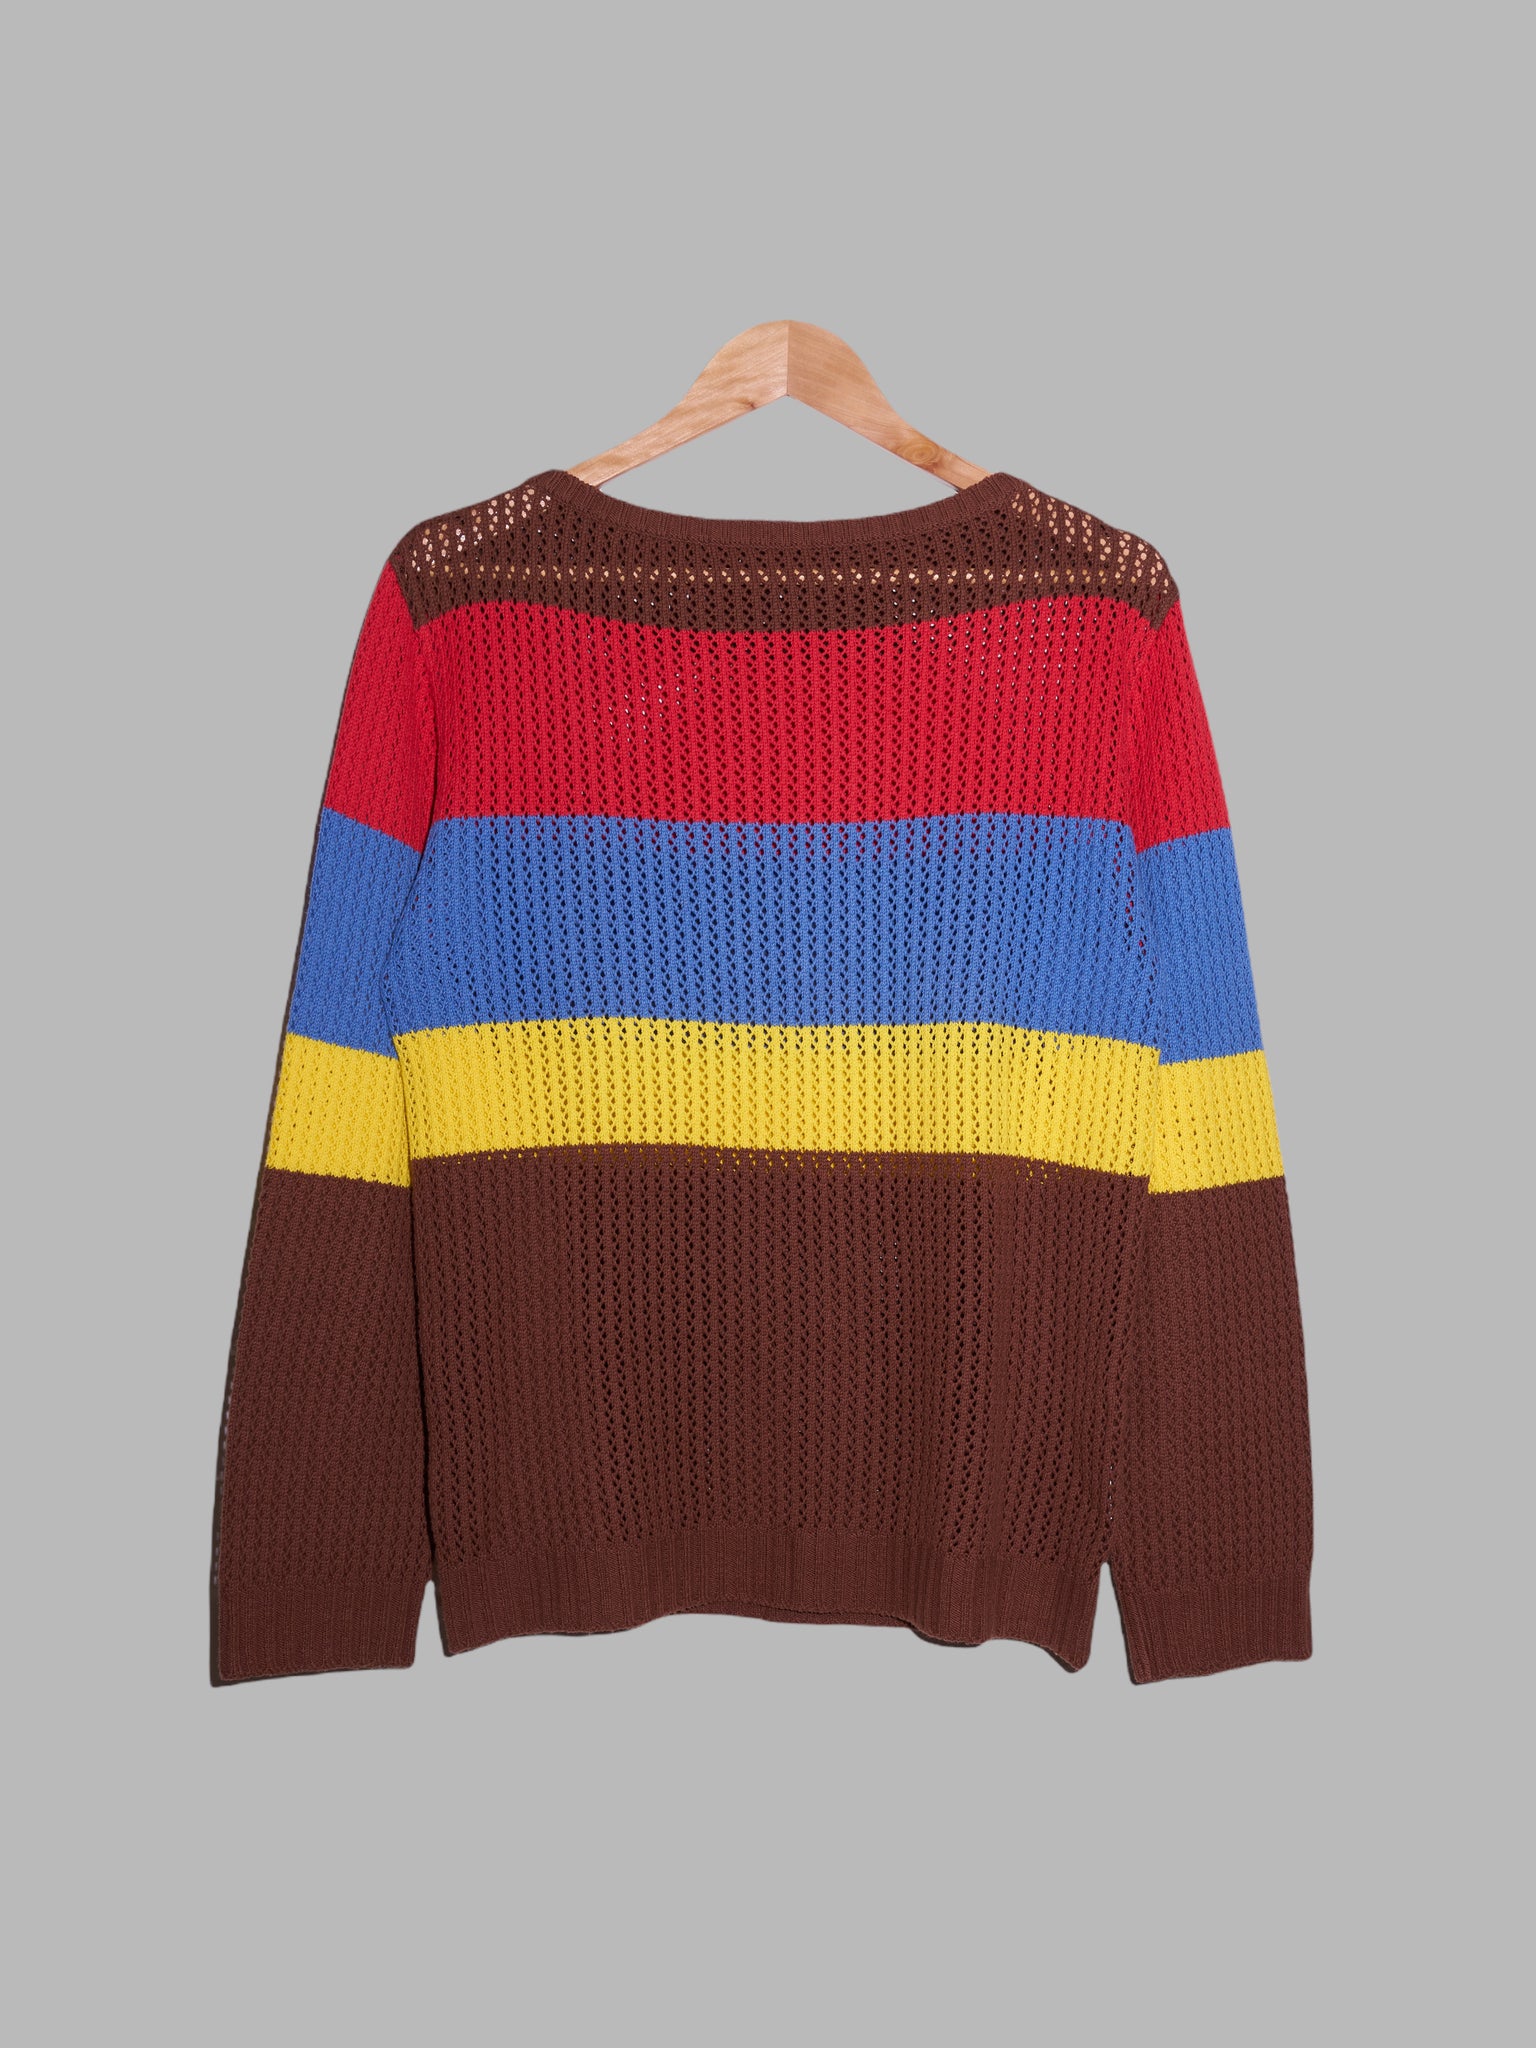 ABX SS2000 brown multicolour striped cotton acrylic loose knit sweater - 3 M L